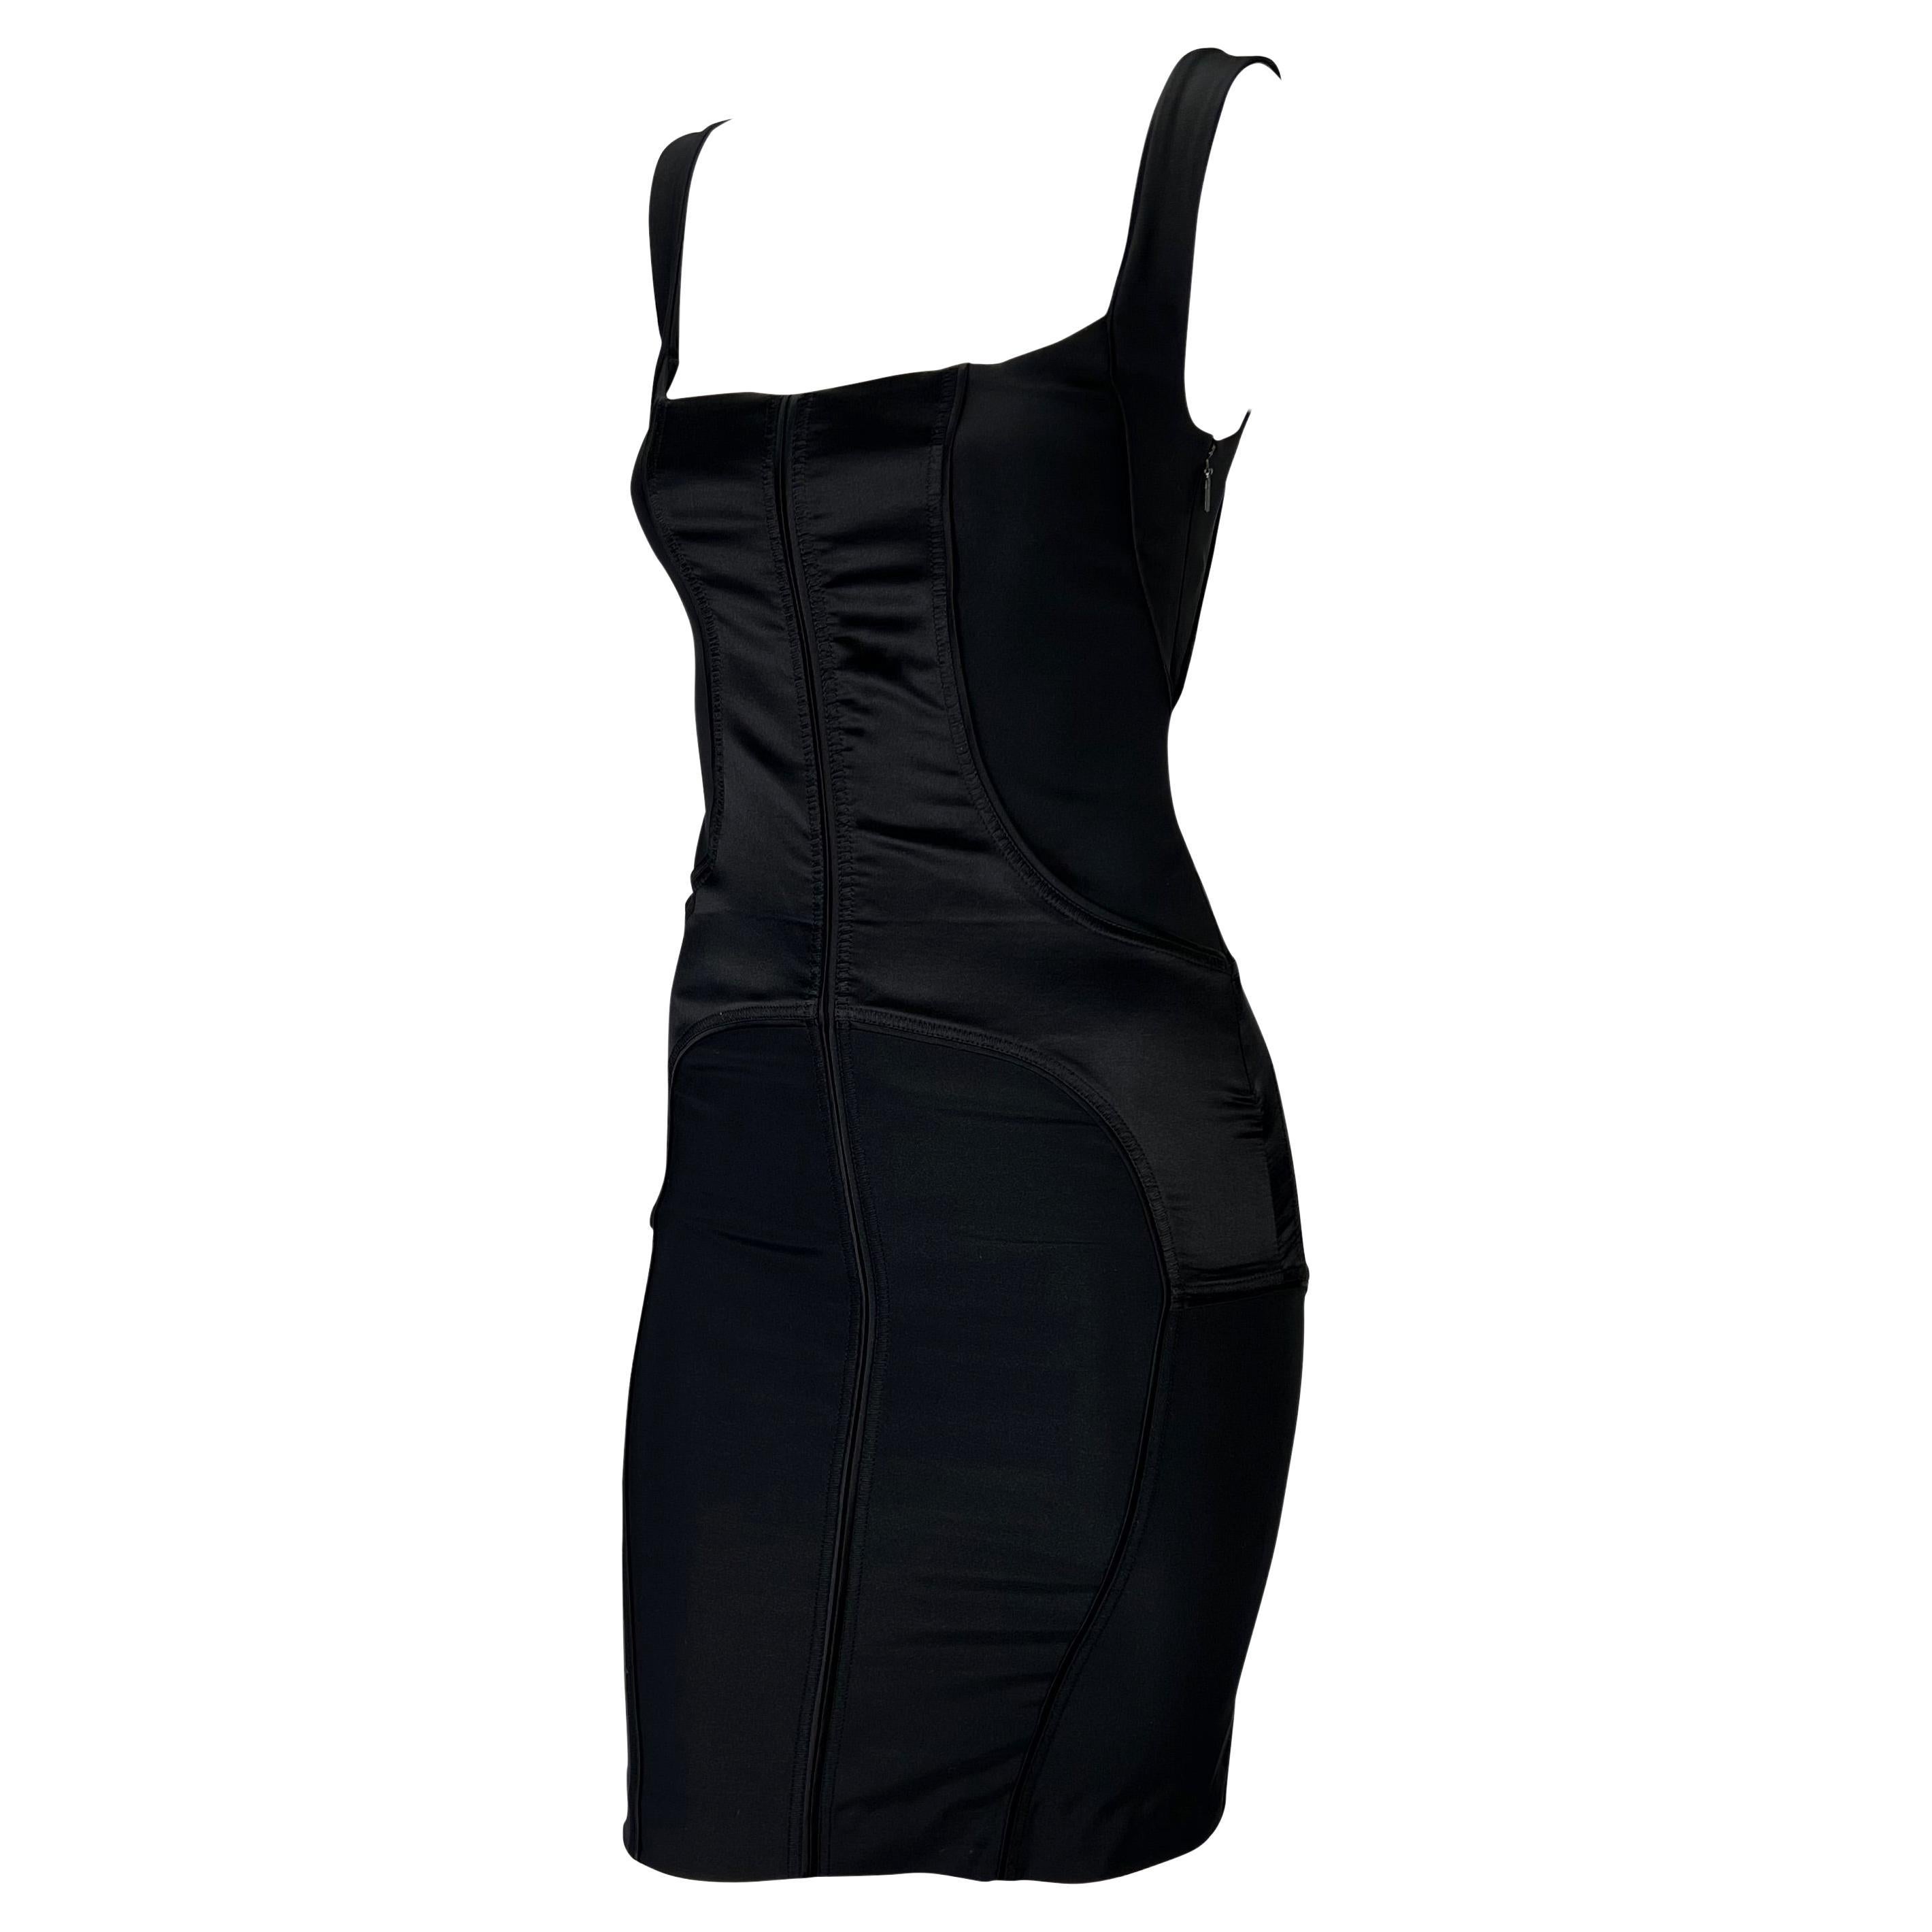 Presenting a stunning silk satin paneled Gucci bodycon dress, designed by Tom Ford. From the Fall/Winter 2003 collection, this dress features a square neckline and small slit in the back. Stretchy and formfitting, this dress clings to the body and